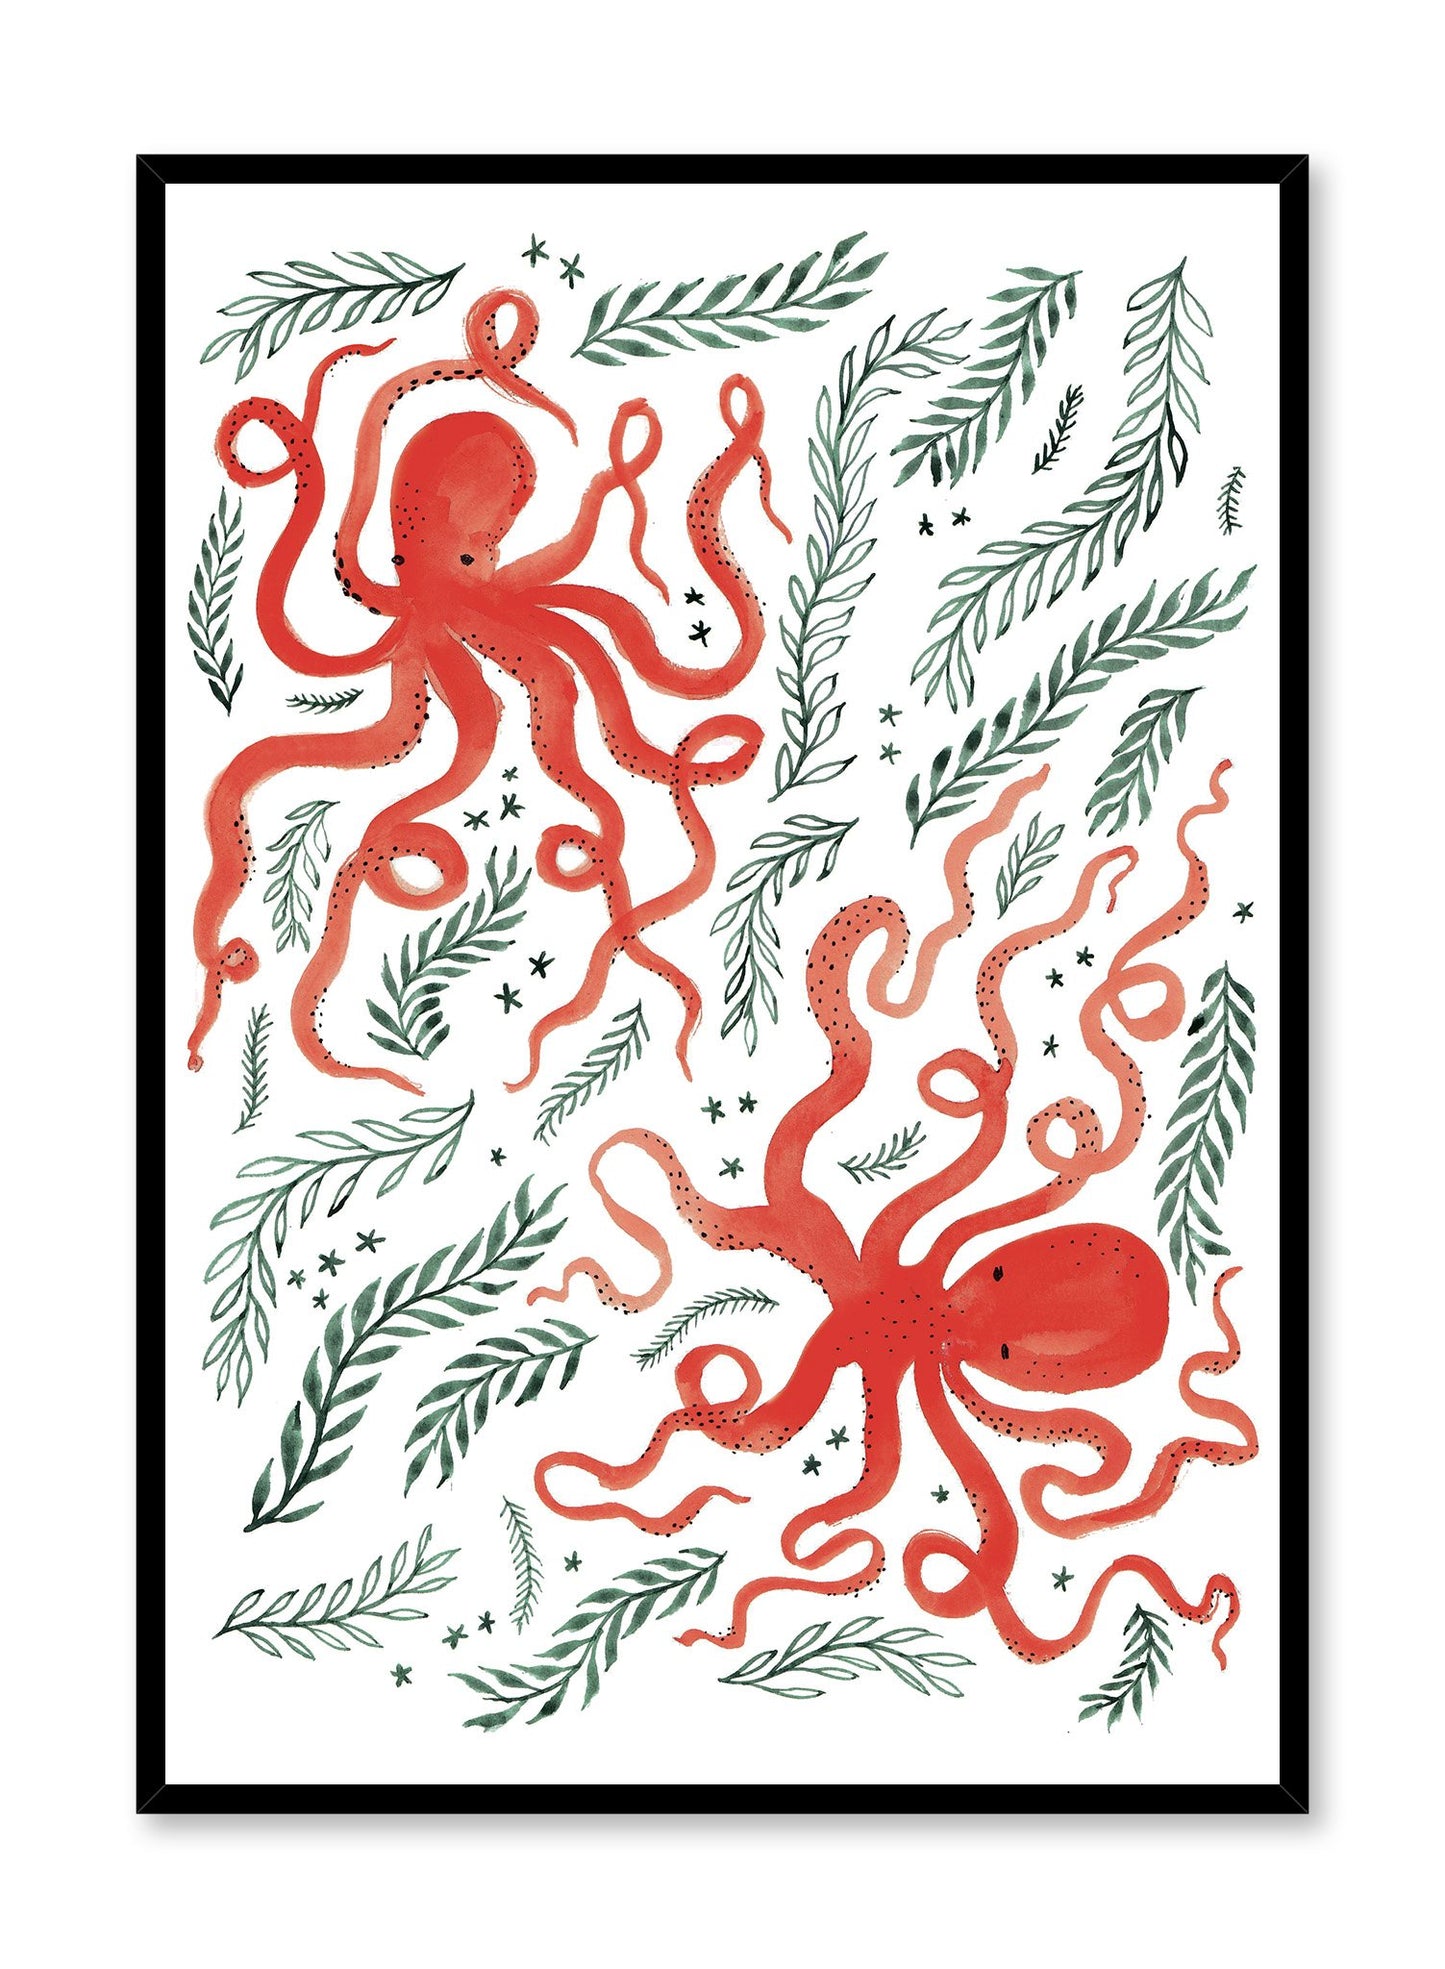 Octopus Duo is a minimalist illustration of two red octopus having a blast in the water while surrounded by seaweed by Opposite Wall.